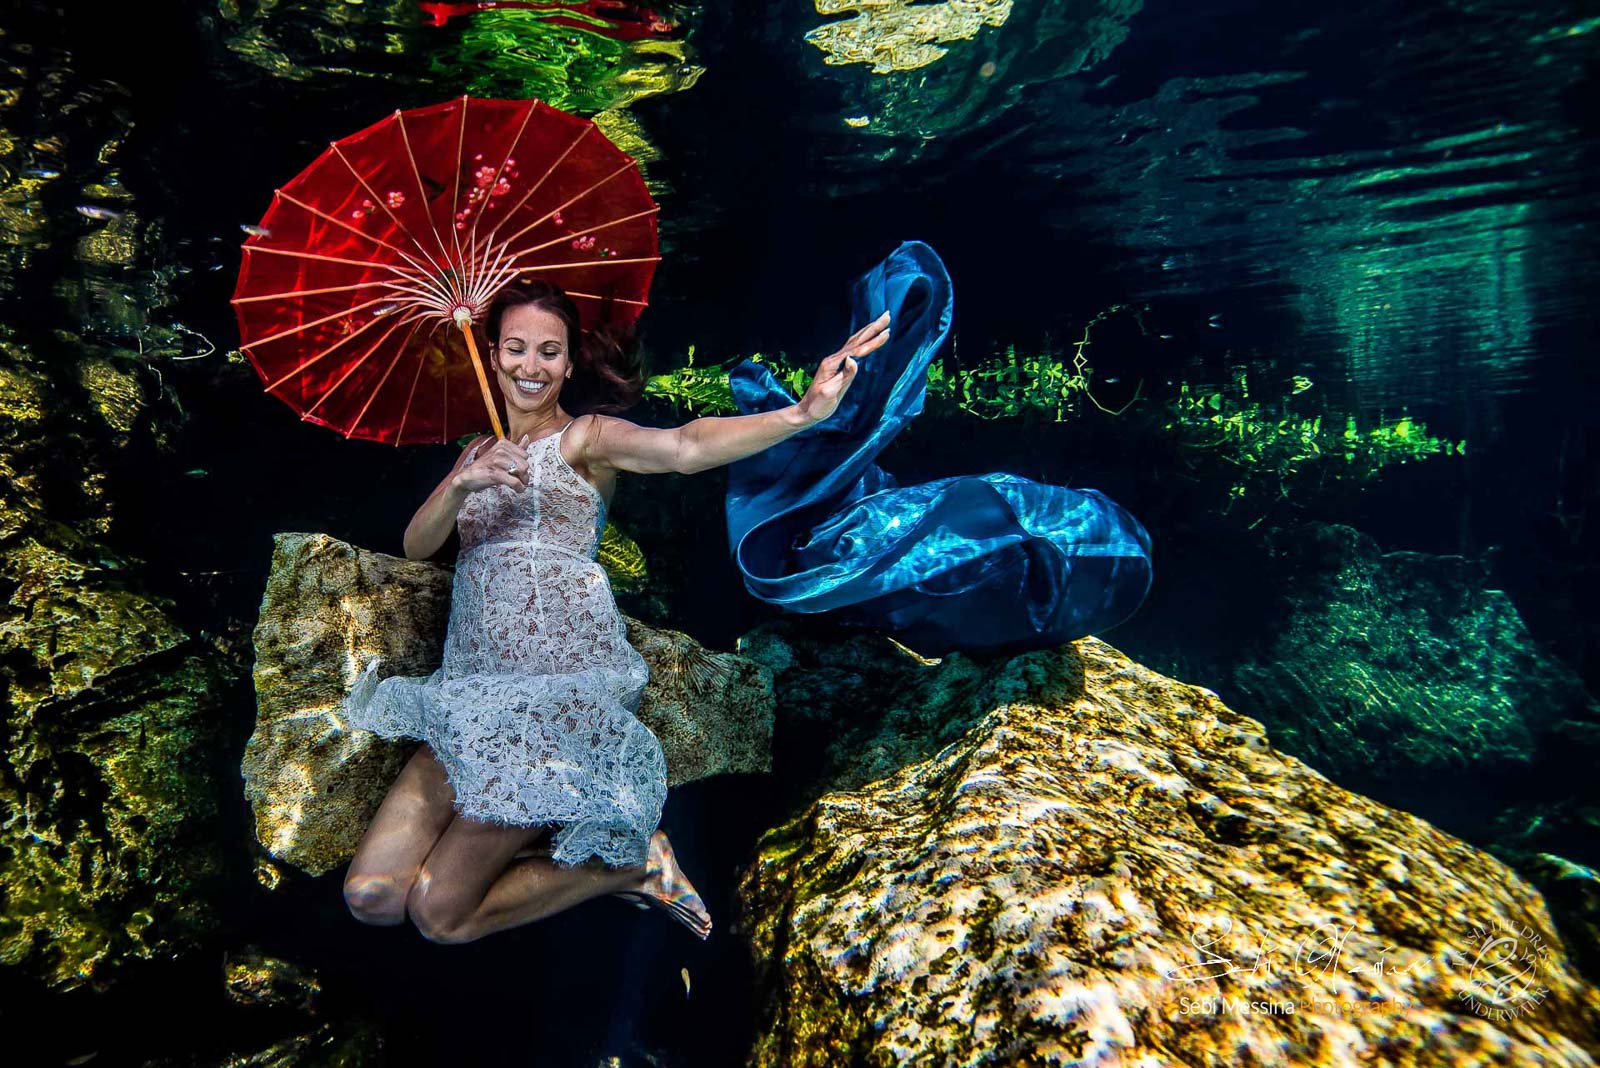 Engagement pictures in a cenote (Mexico) – Sebi Messina Photography